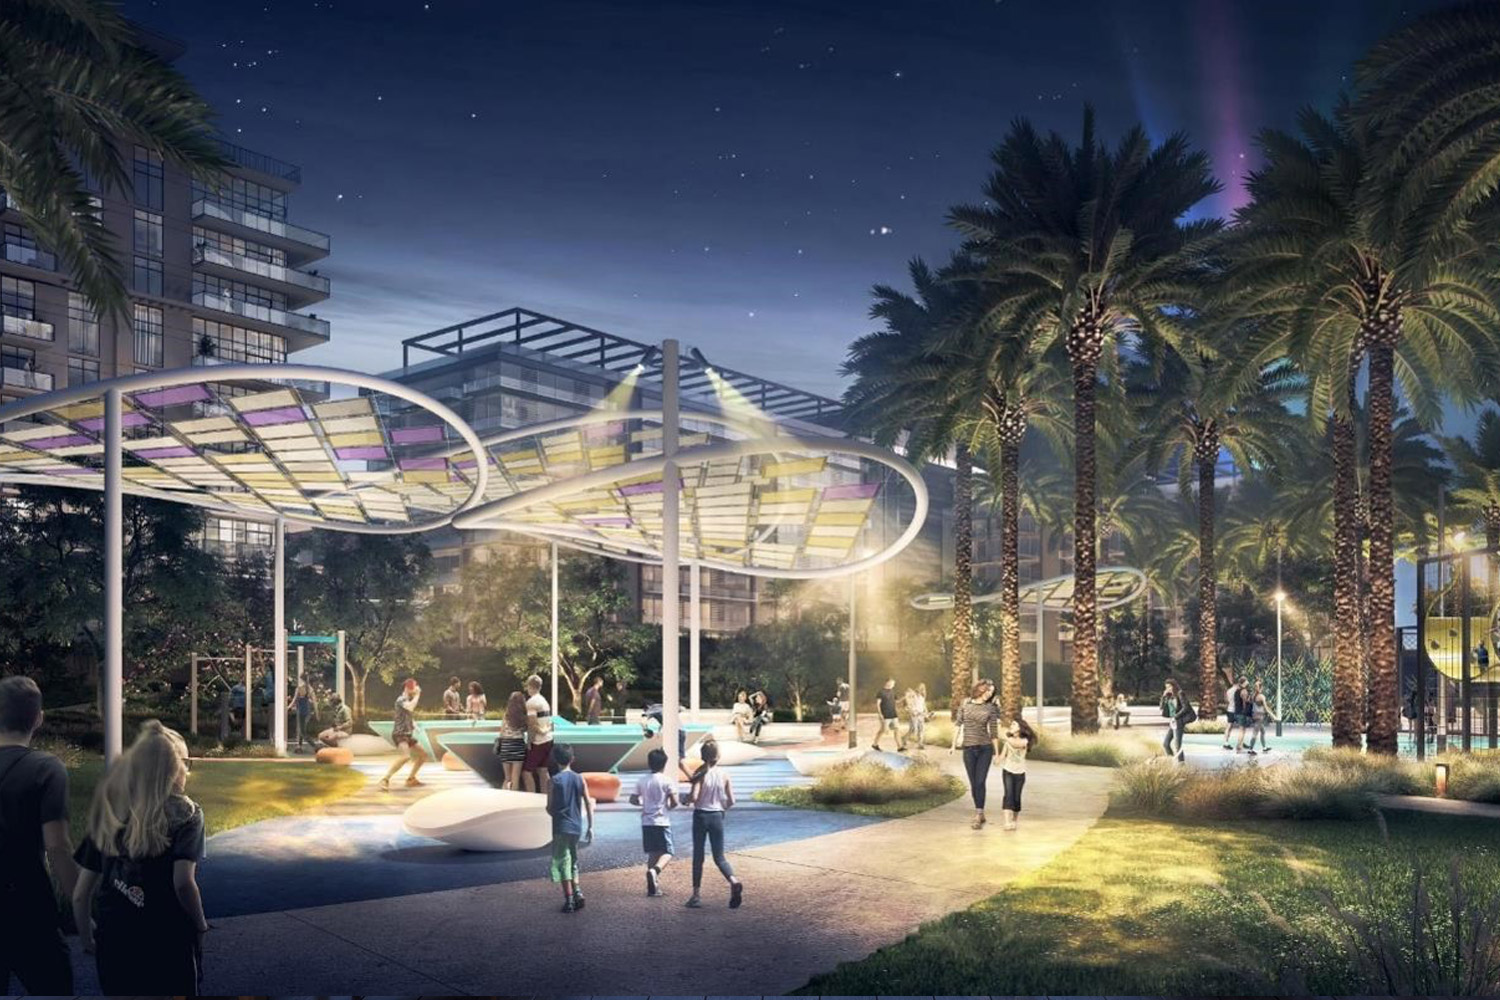 latest-project-in-dubai-central-park-plaza-for-sale-in-central-park